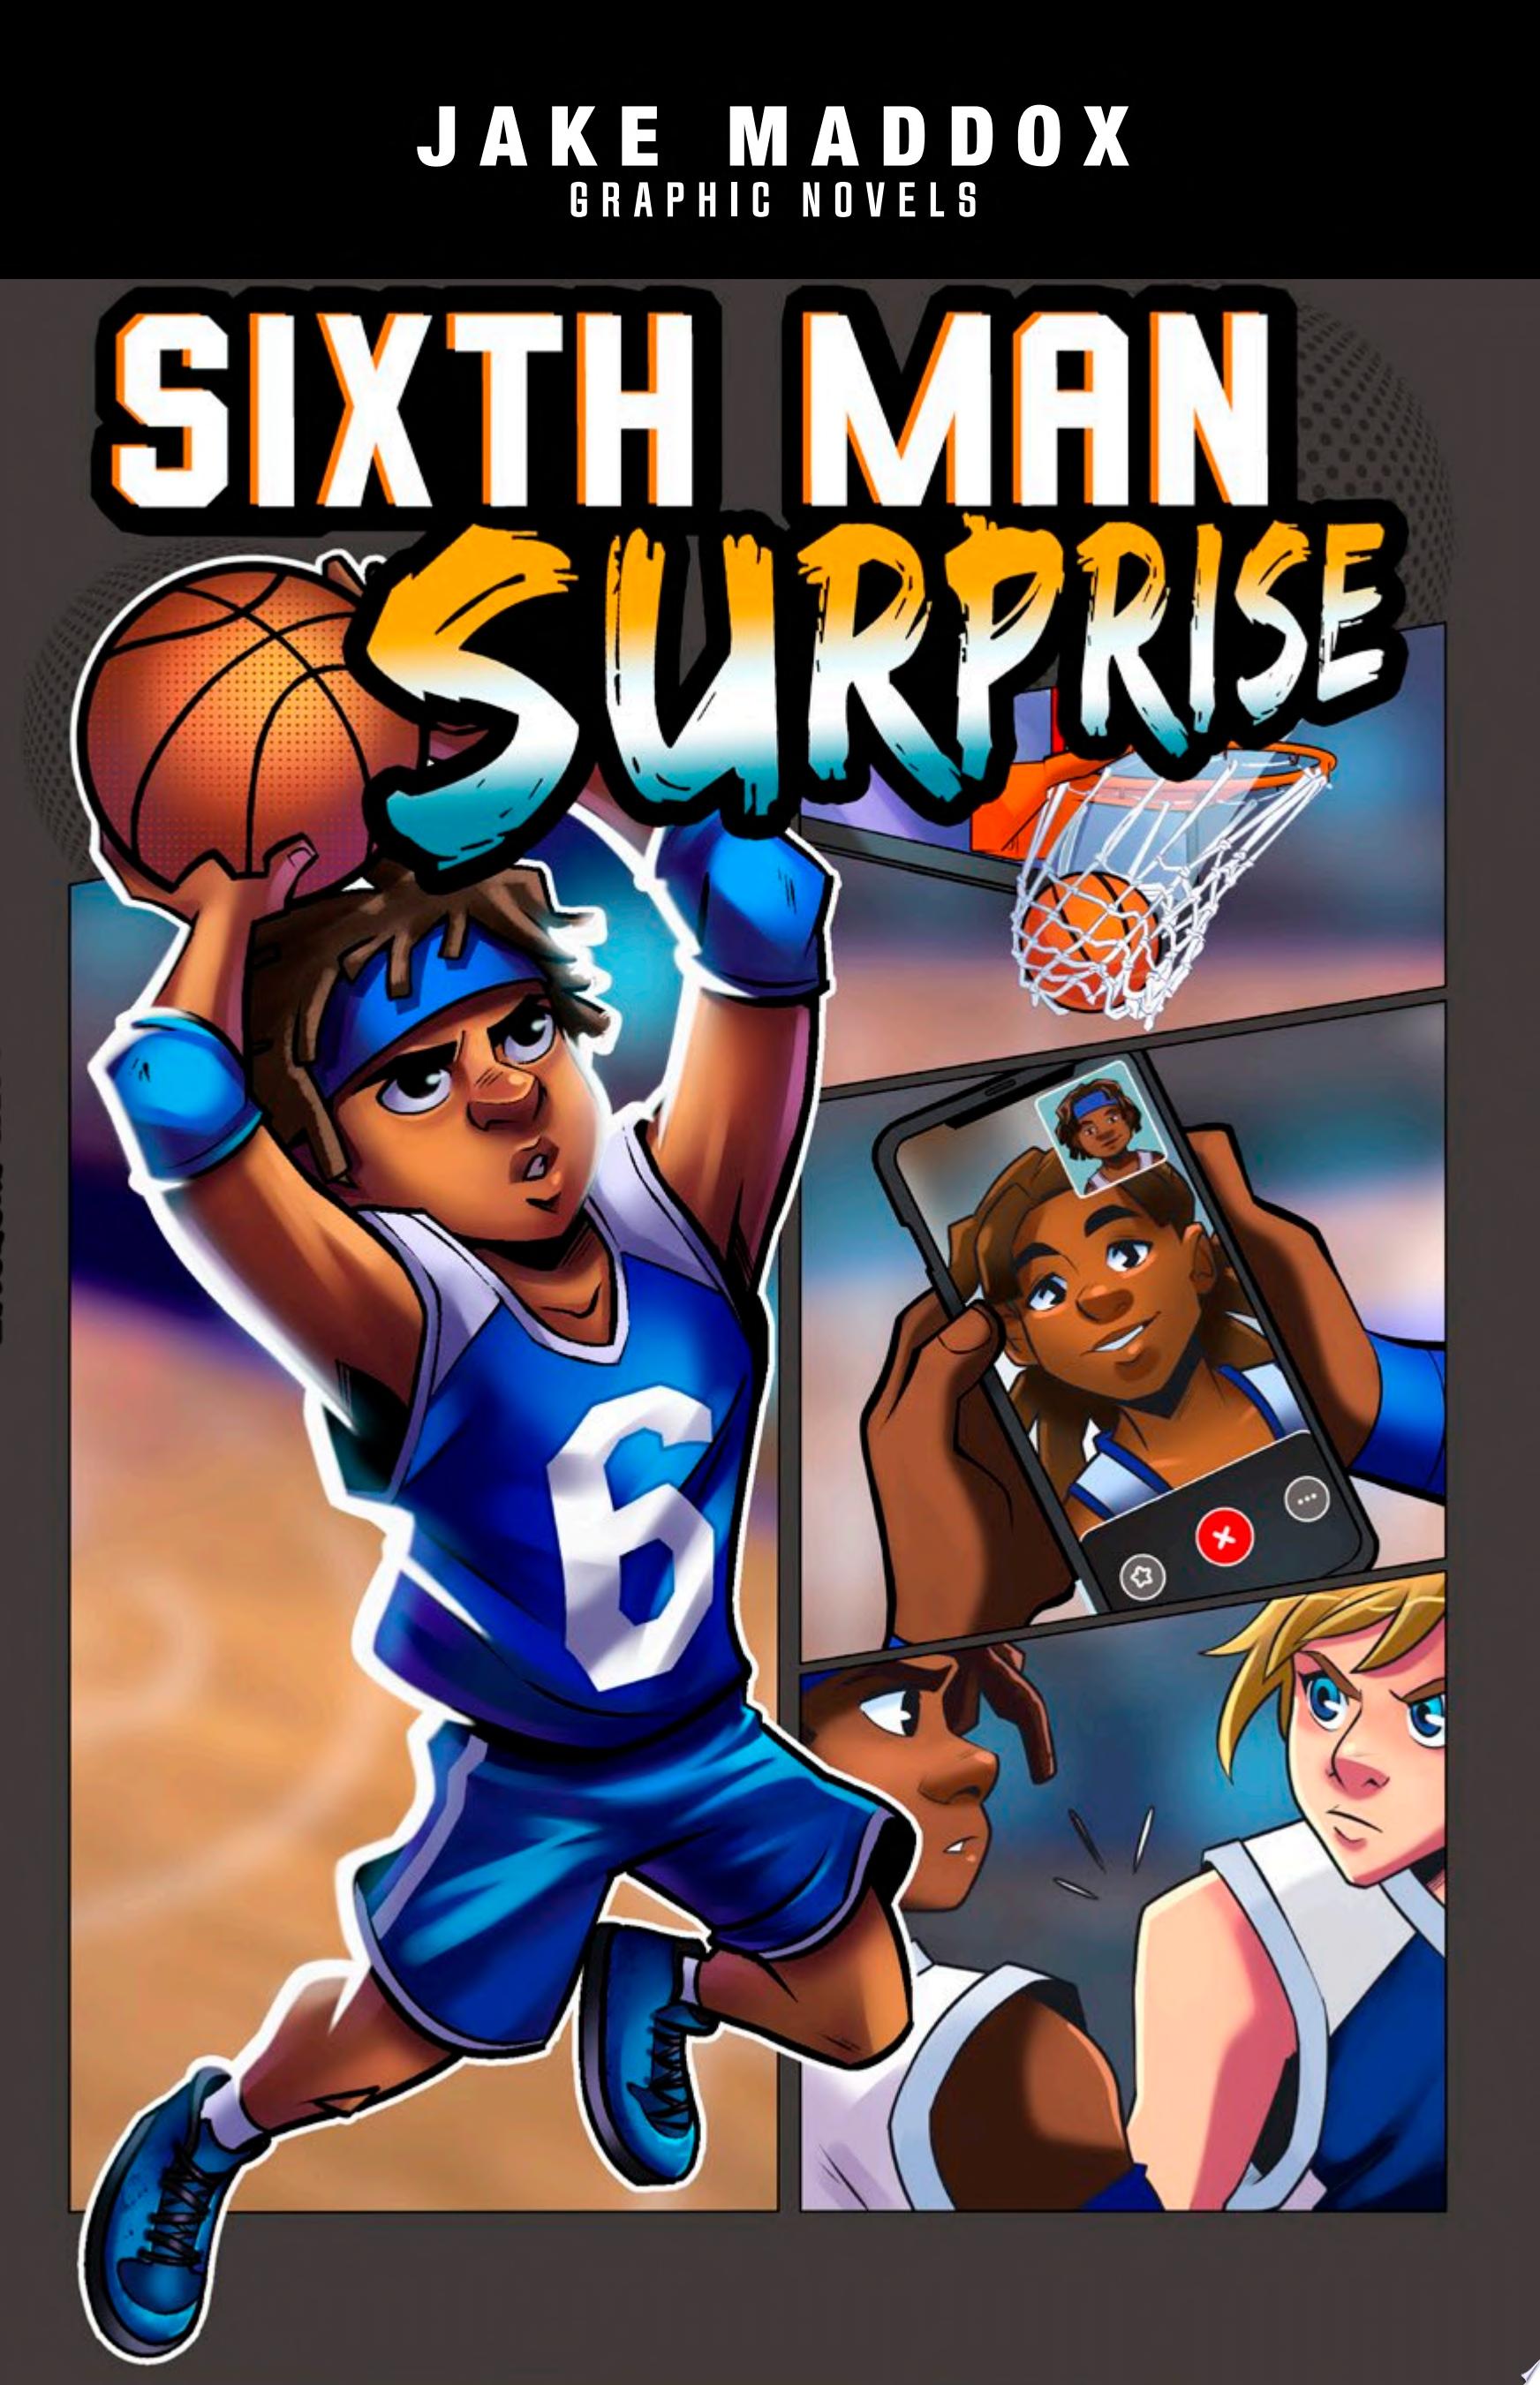 Image for "Sixth Man Surprise"